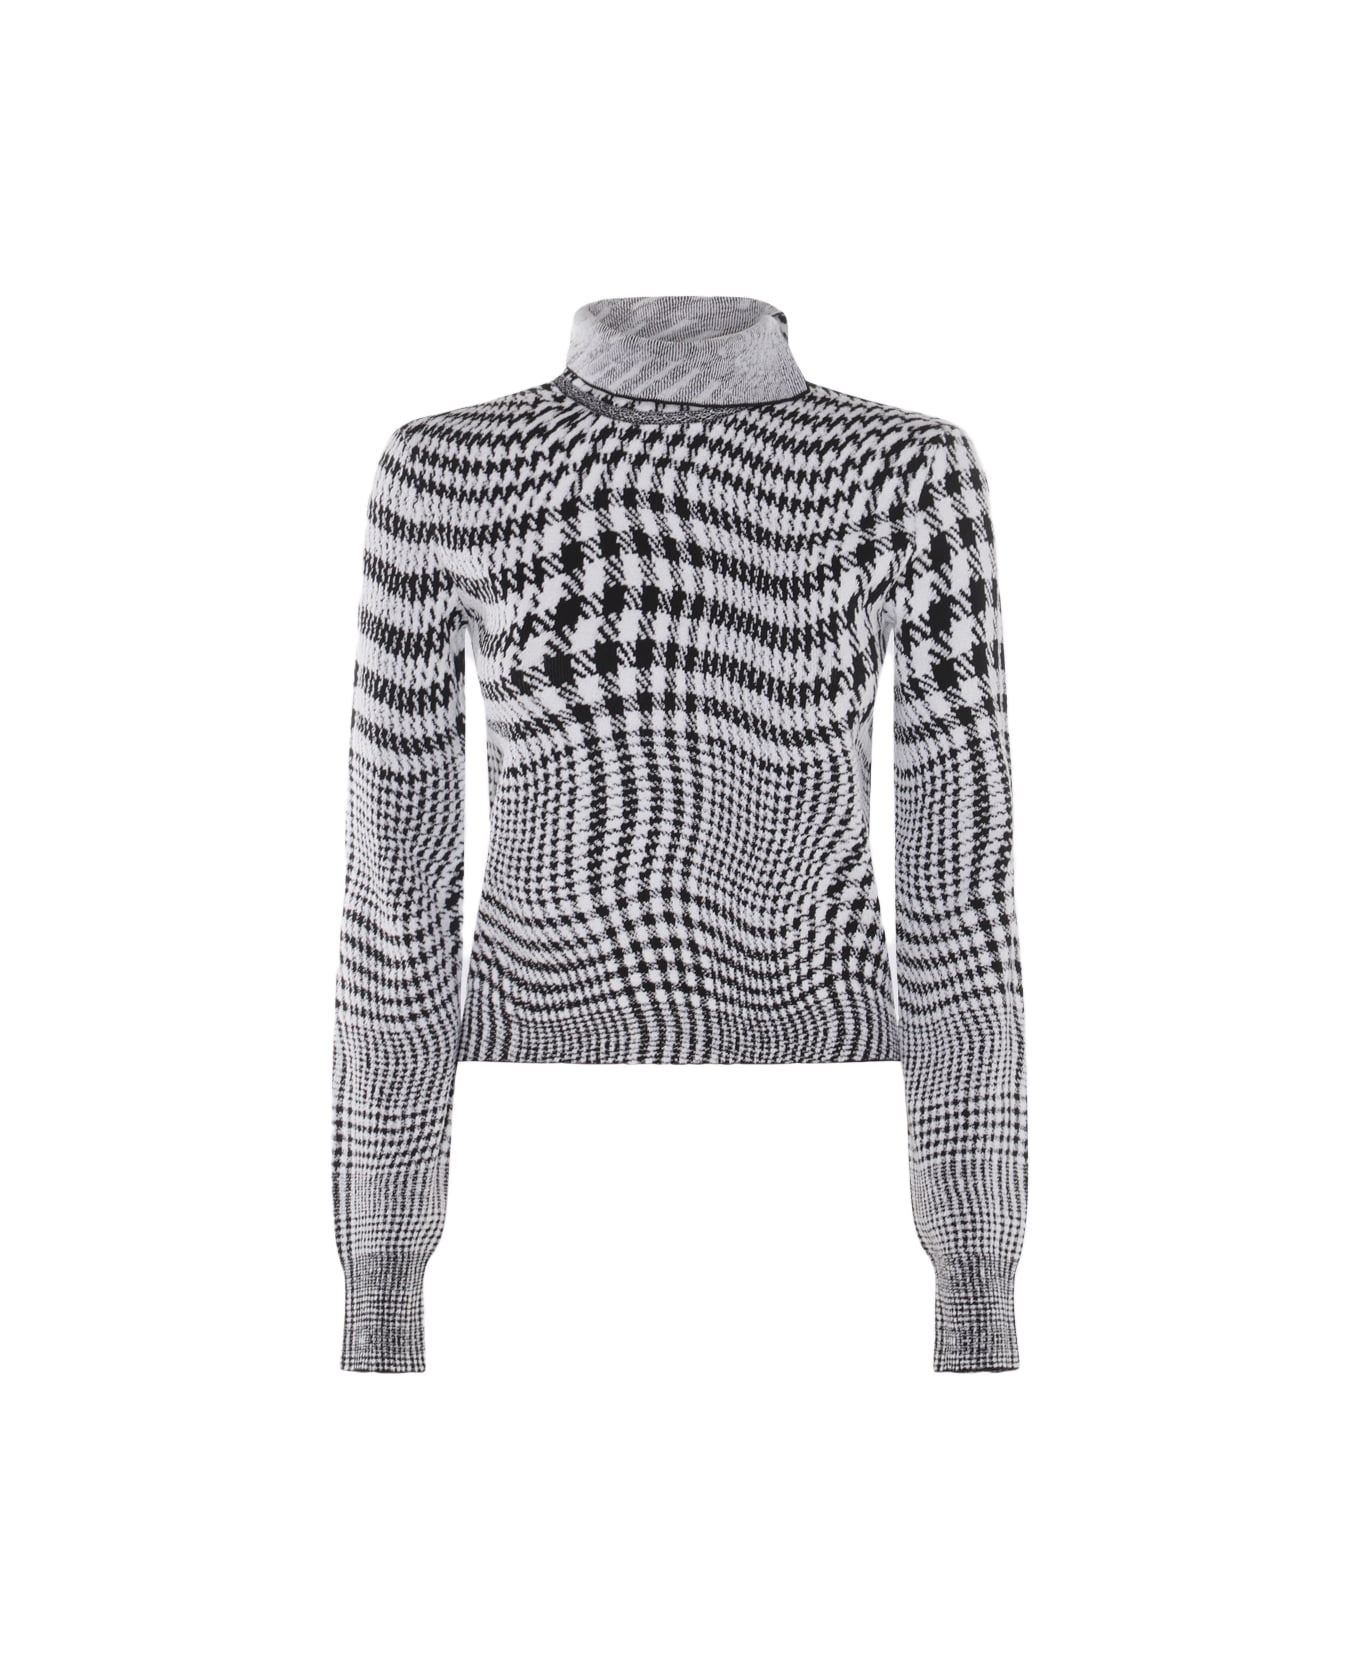 Burberry Black And White Wool Blend Pied-de-poule Sweater - Monochrome ip pttn